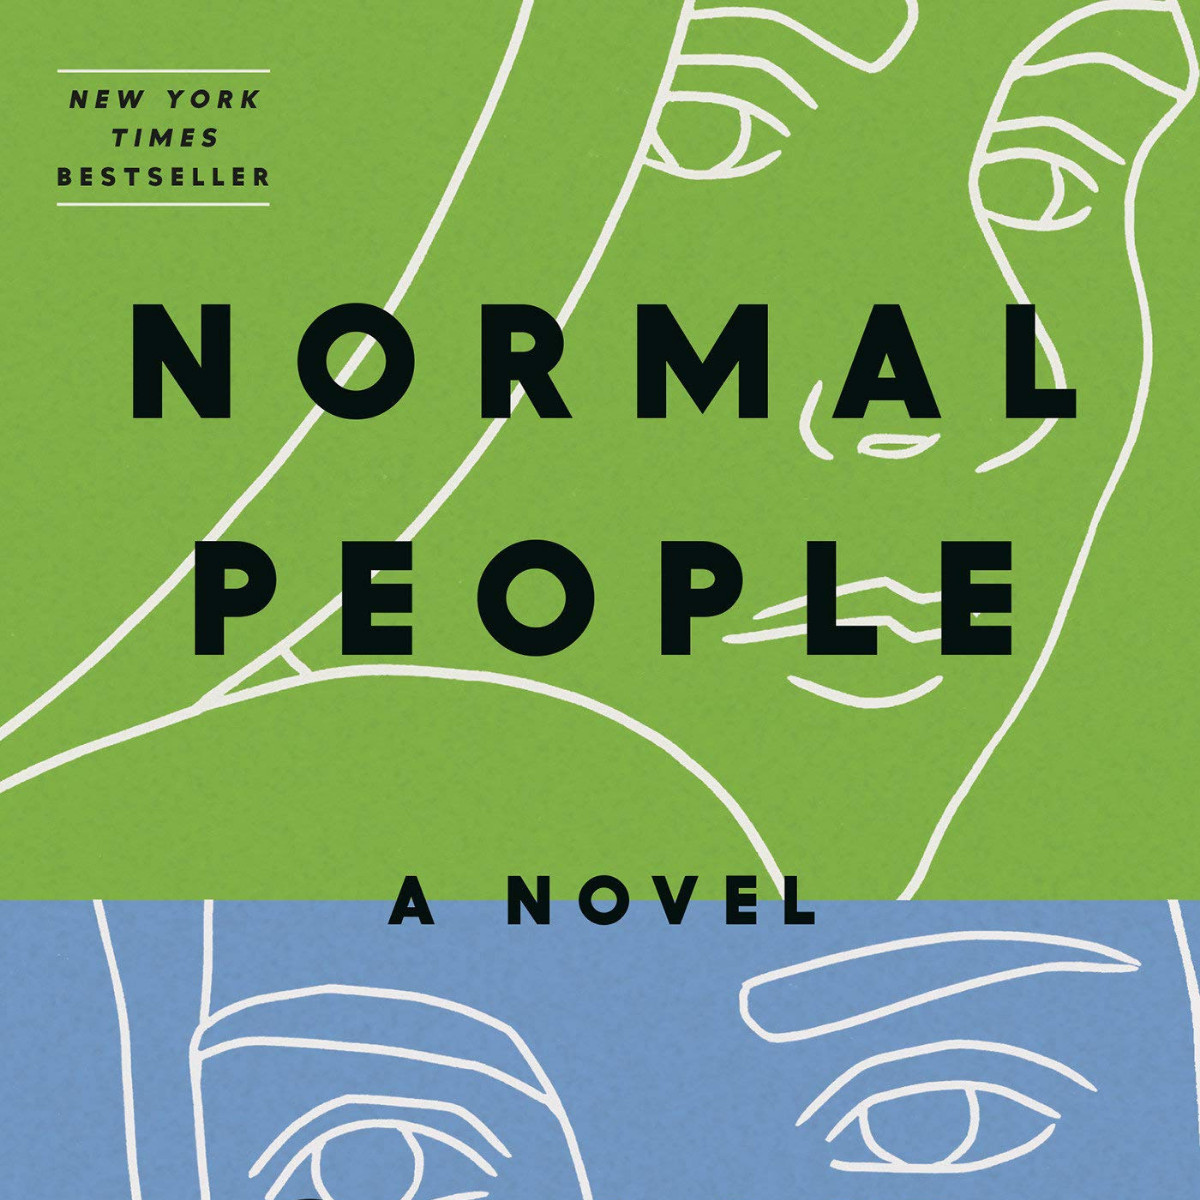 Normal People by sally rooney